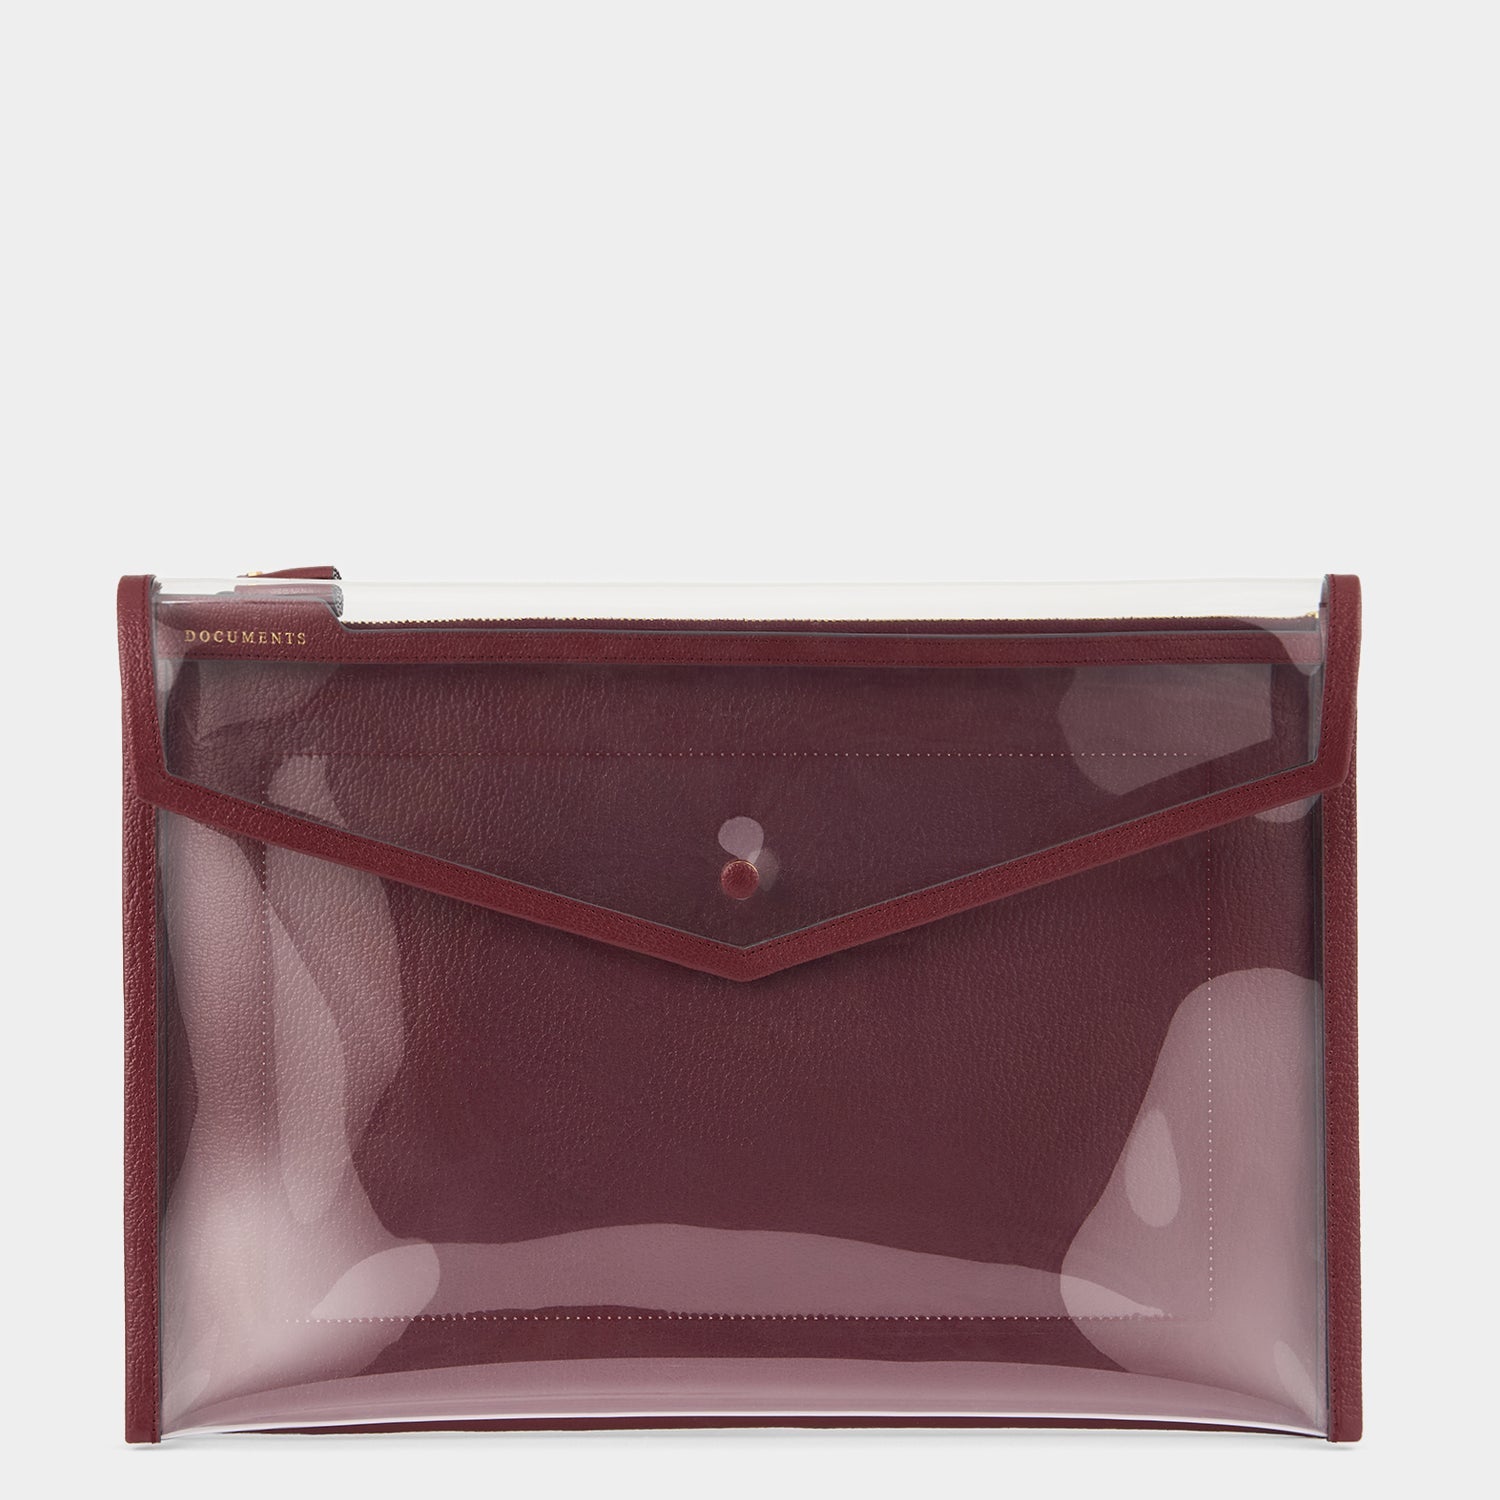 Documents Envelope -

                  
                    Capra Leather in Medium Red/Clear -
                  

                  Anya Hindmarch EU
